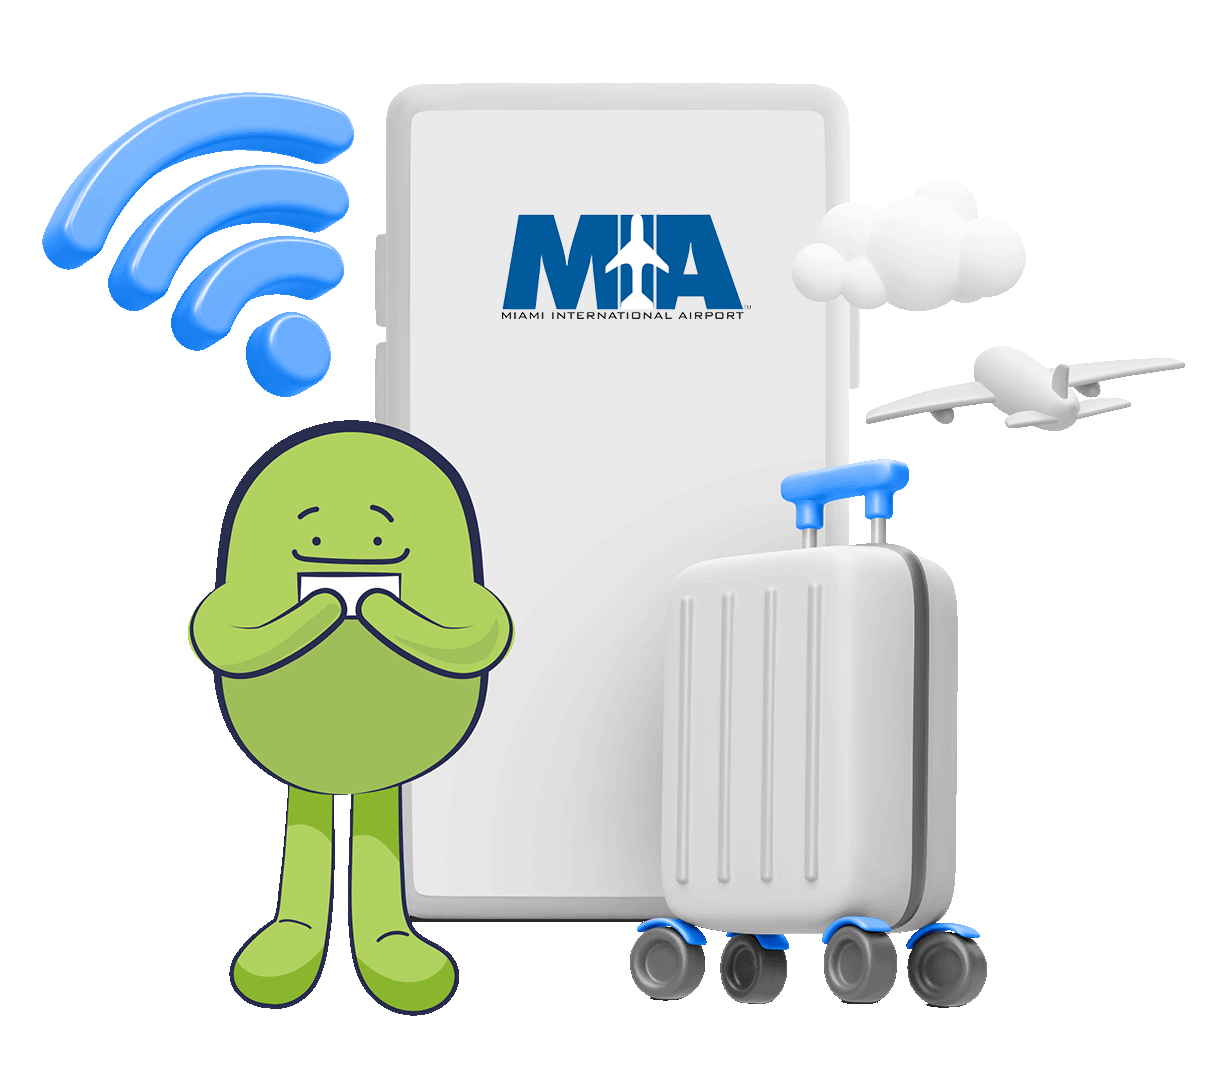 How to connect to Miami Airport WiFi